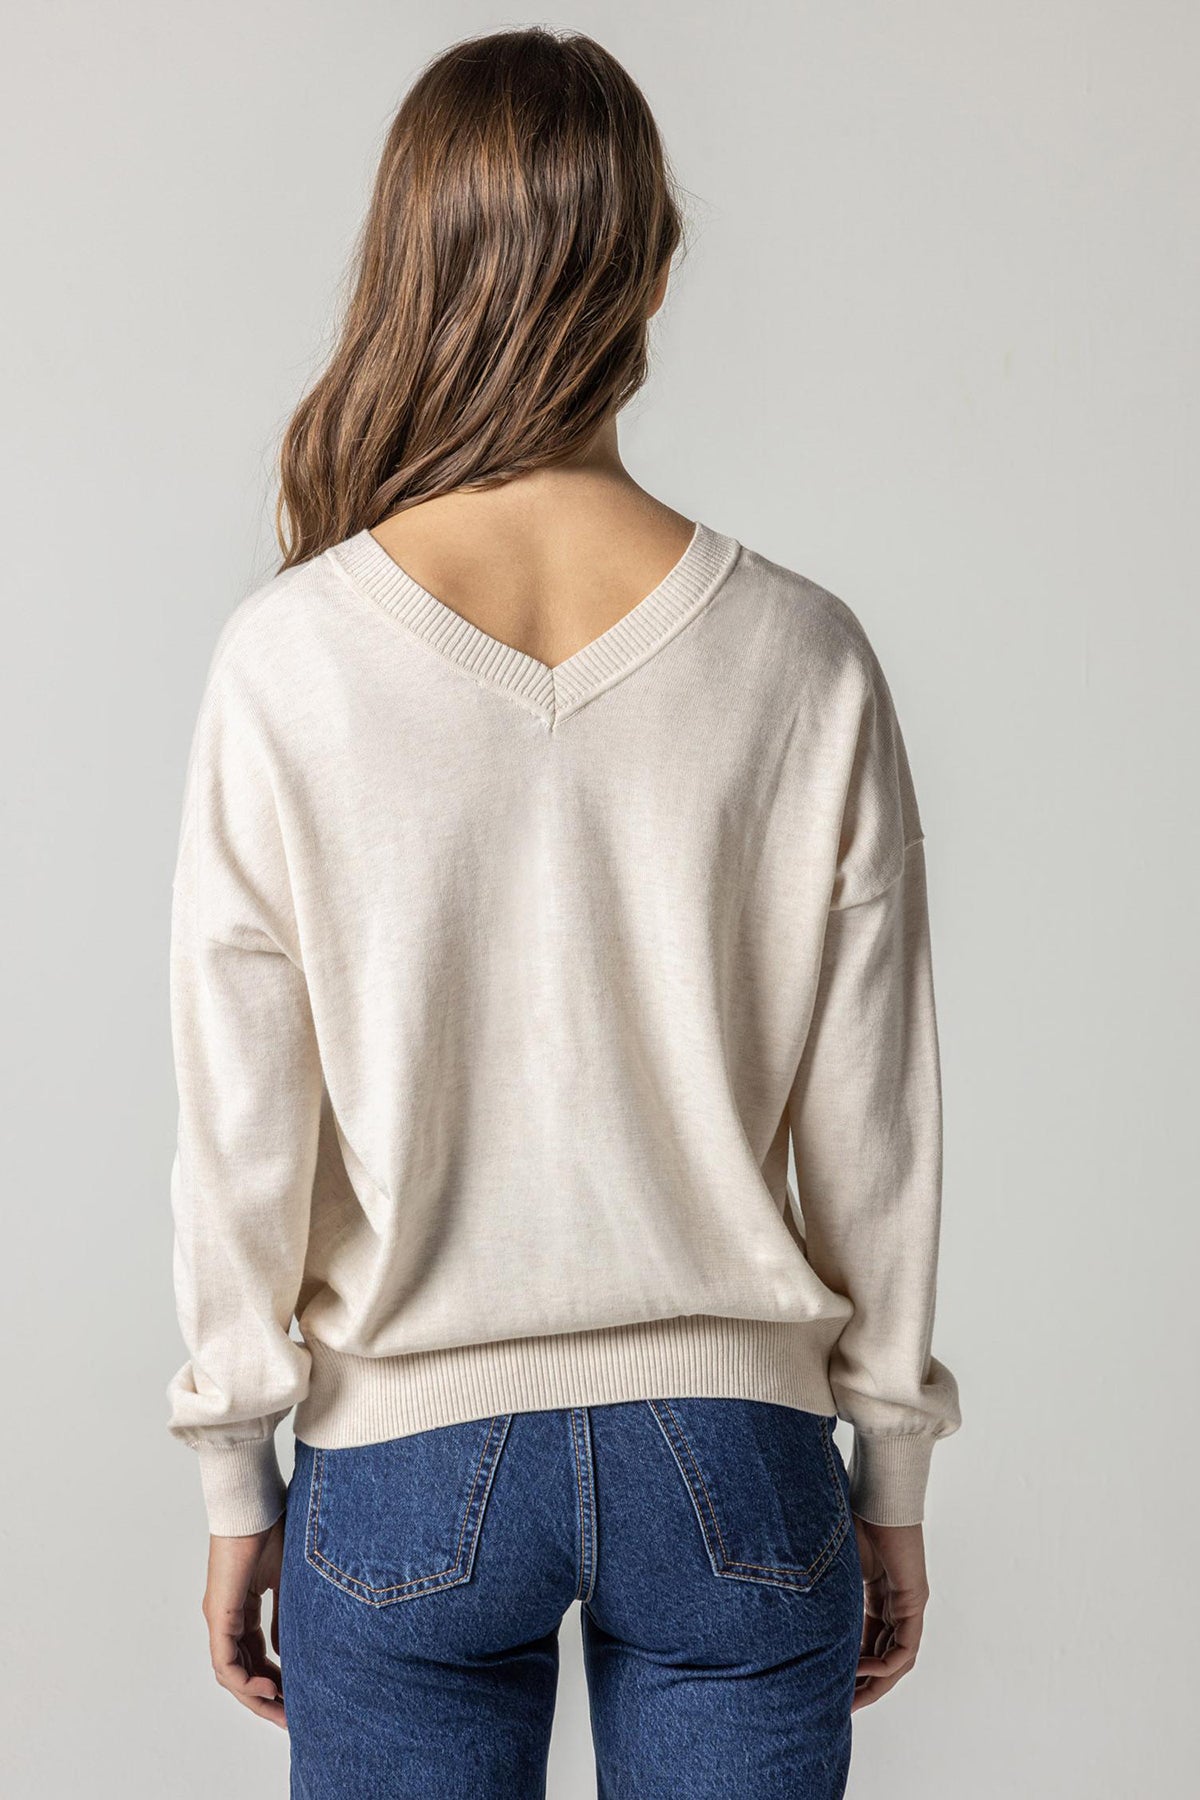 Easy Double V Neck Sweater- Oatmeal